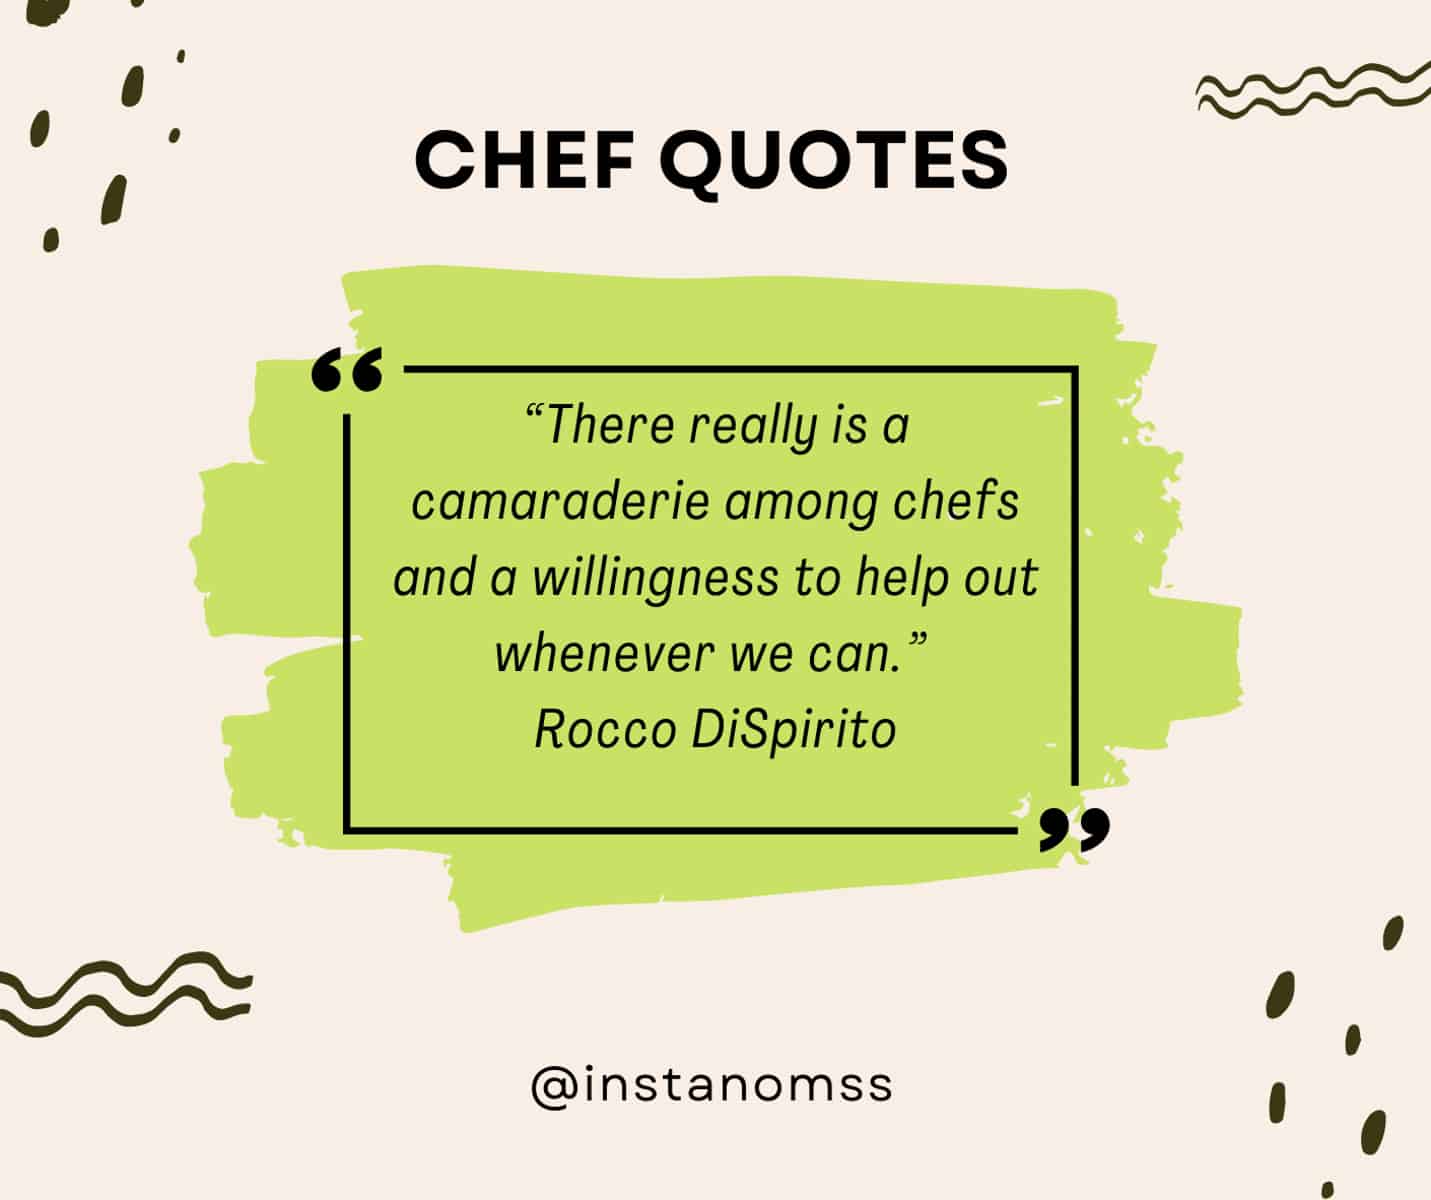 “There really is a camaraderie among chefs and a willingness to help out whenever we can.” Rocco DiSpirito